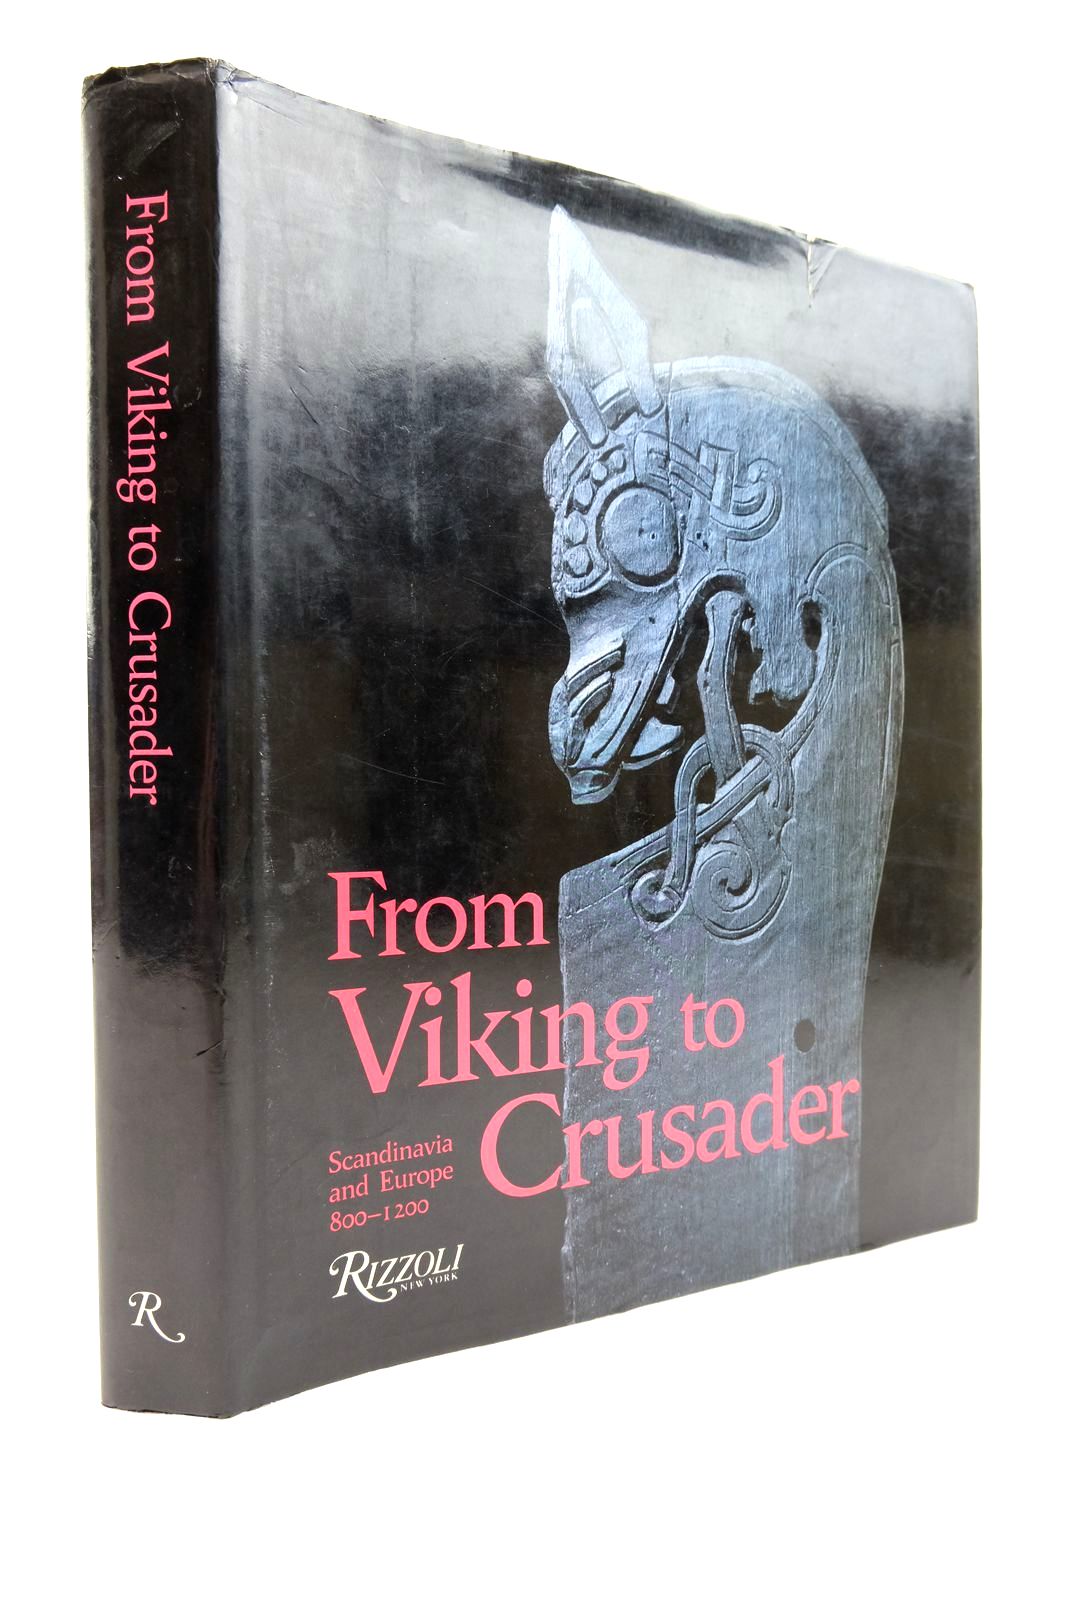 Photo of FROM VIKING TO CRUSADER: THE SCANDINAVIANS AND EUROPE 800-1200 written by Roesdahl, Else Wilson, David M. published by Rizzoli International Publications (STOCK CODE: 2139035)  for sale by Stella & Rose's Books